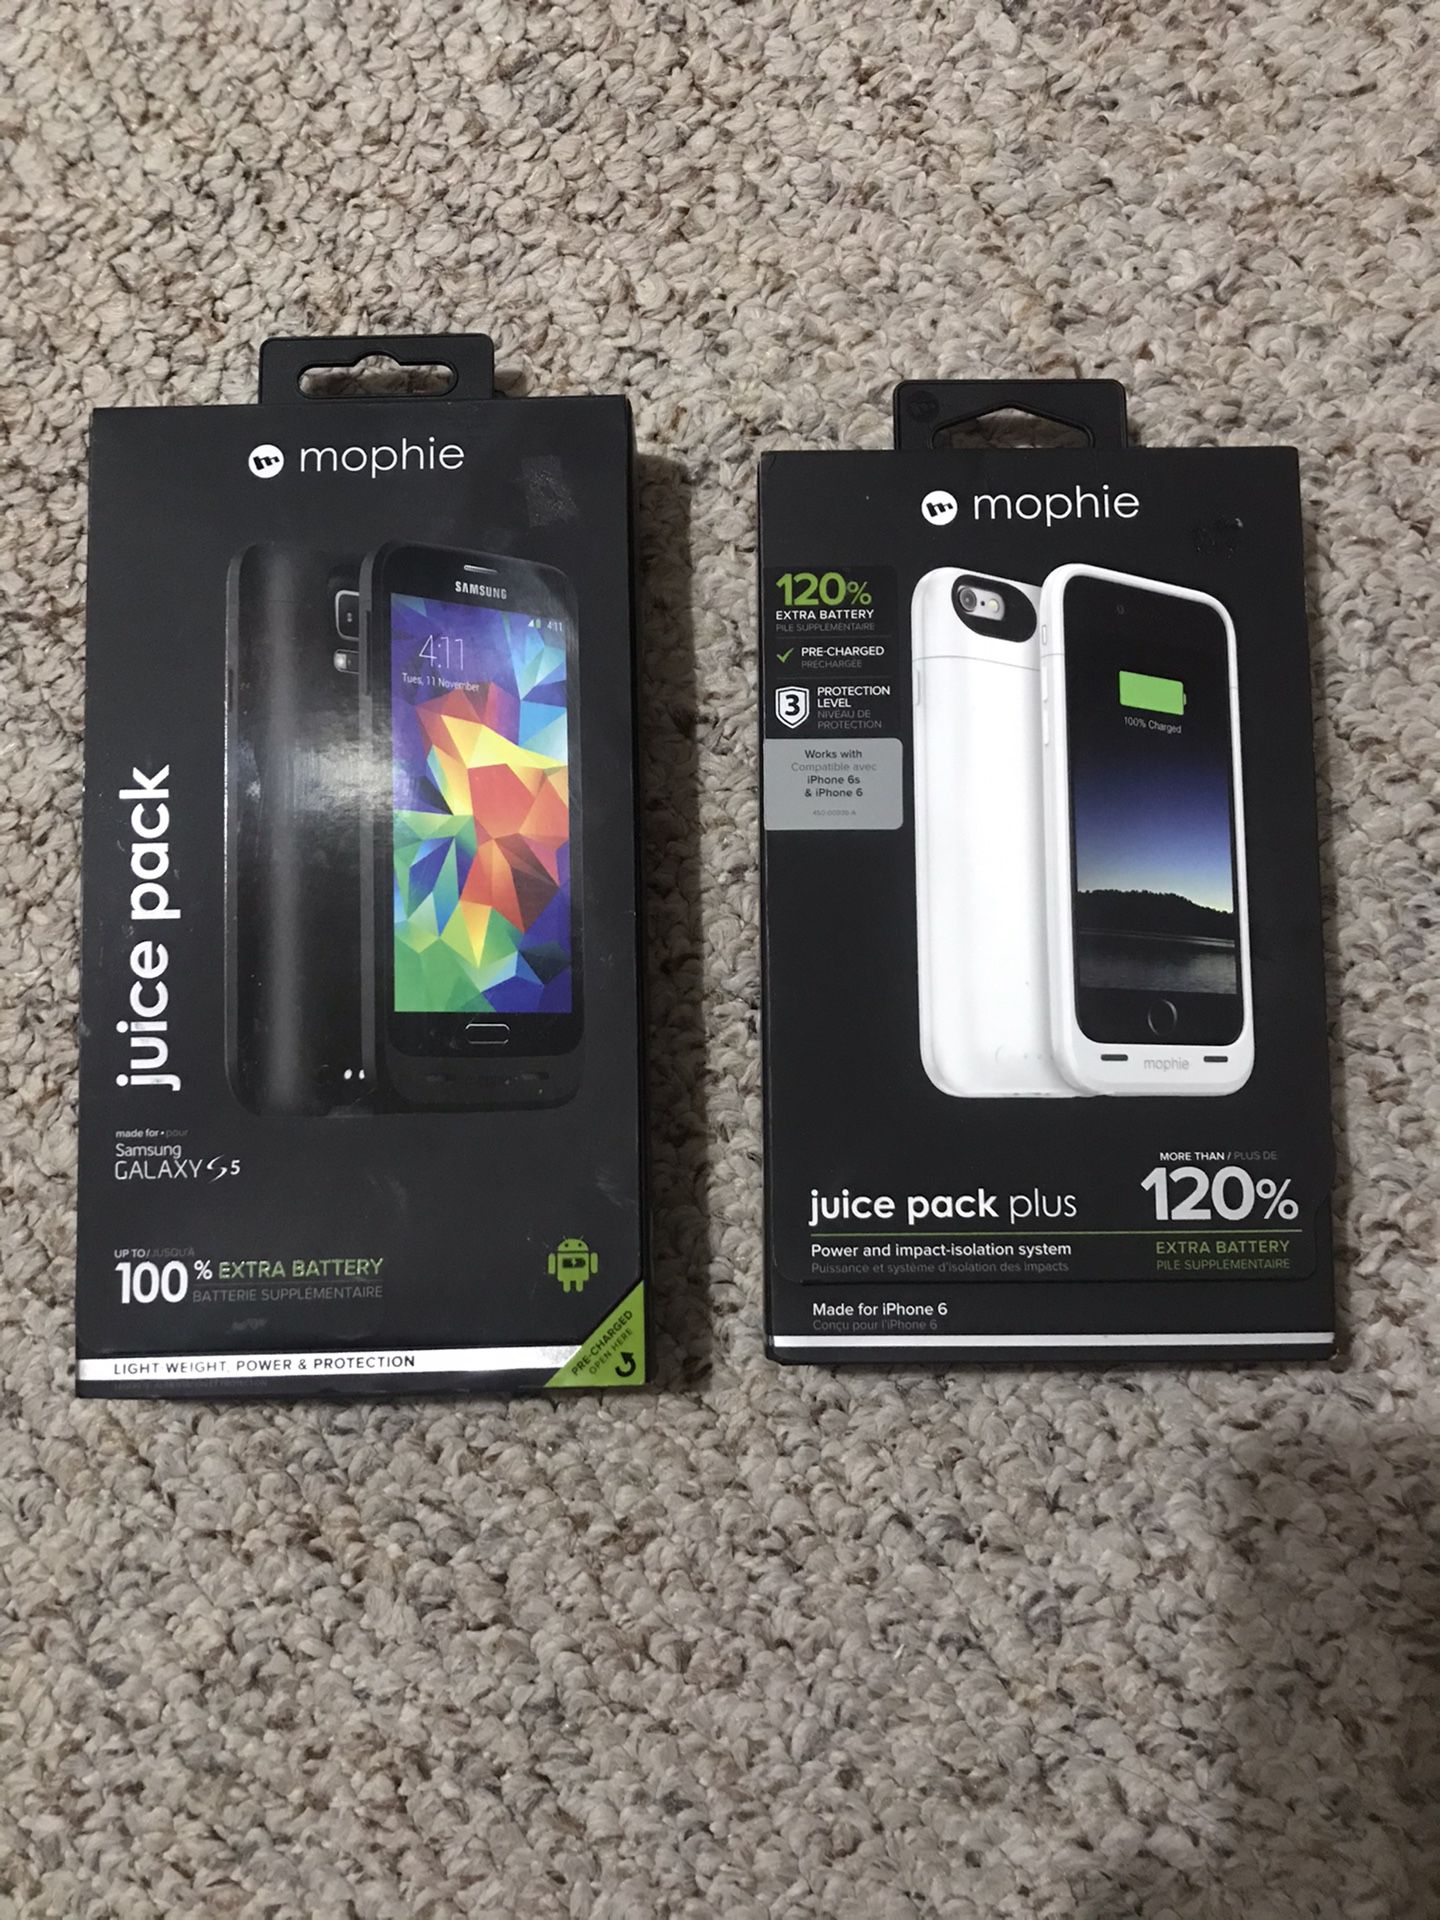 New Mophie juice pack plus for IPhone 6 and Sumsung Galaxy S5